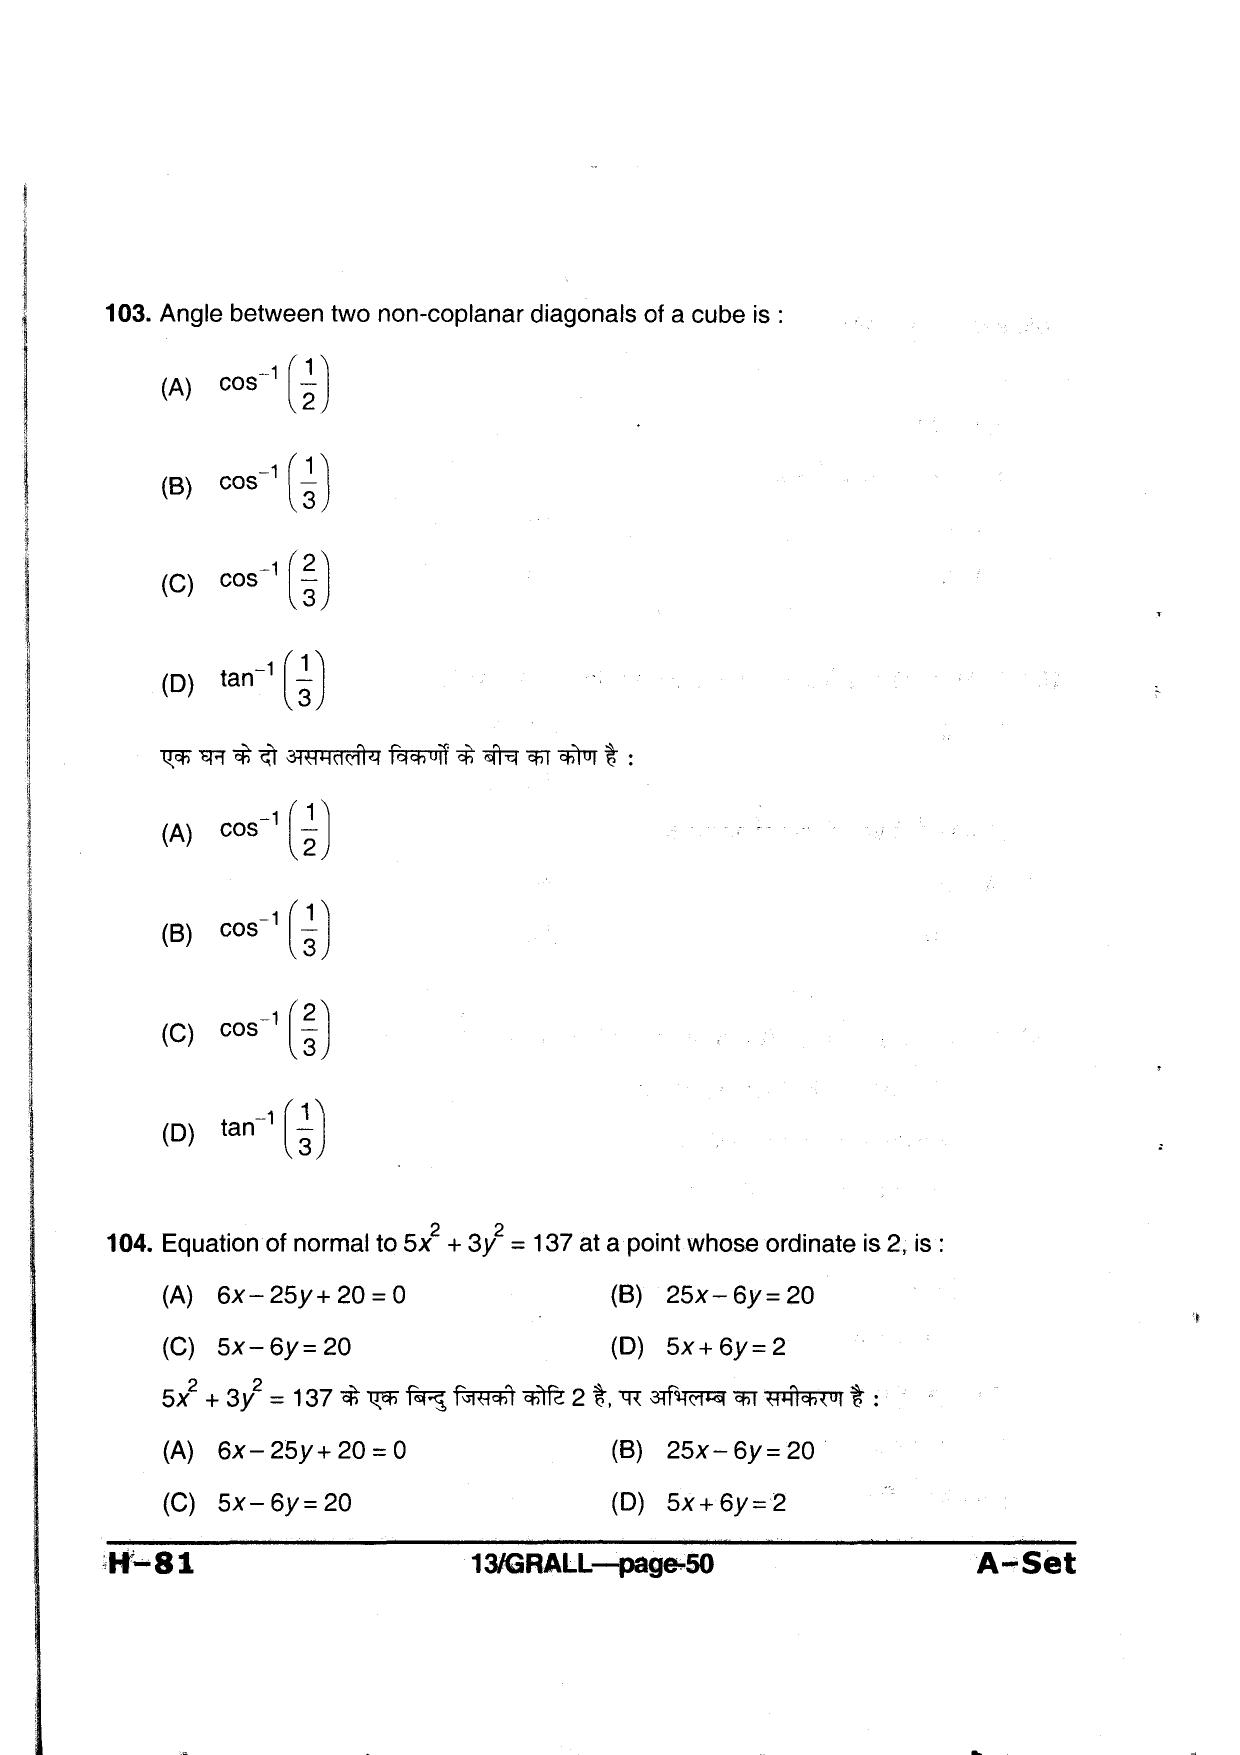 MP PAT 2013 Question Paper - Paper I - Page 50